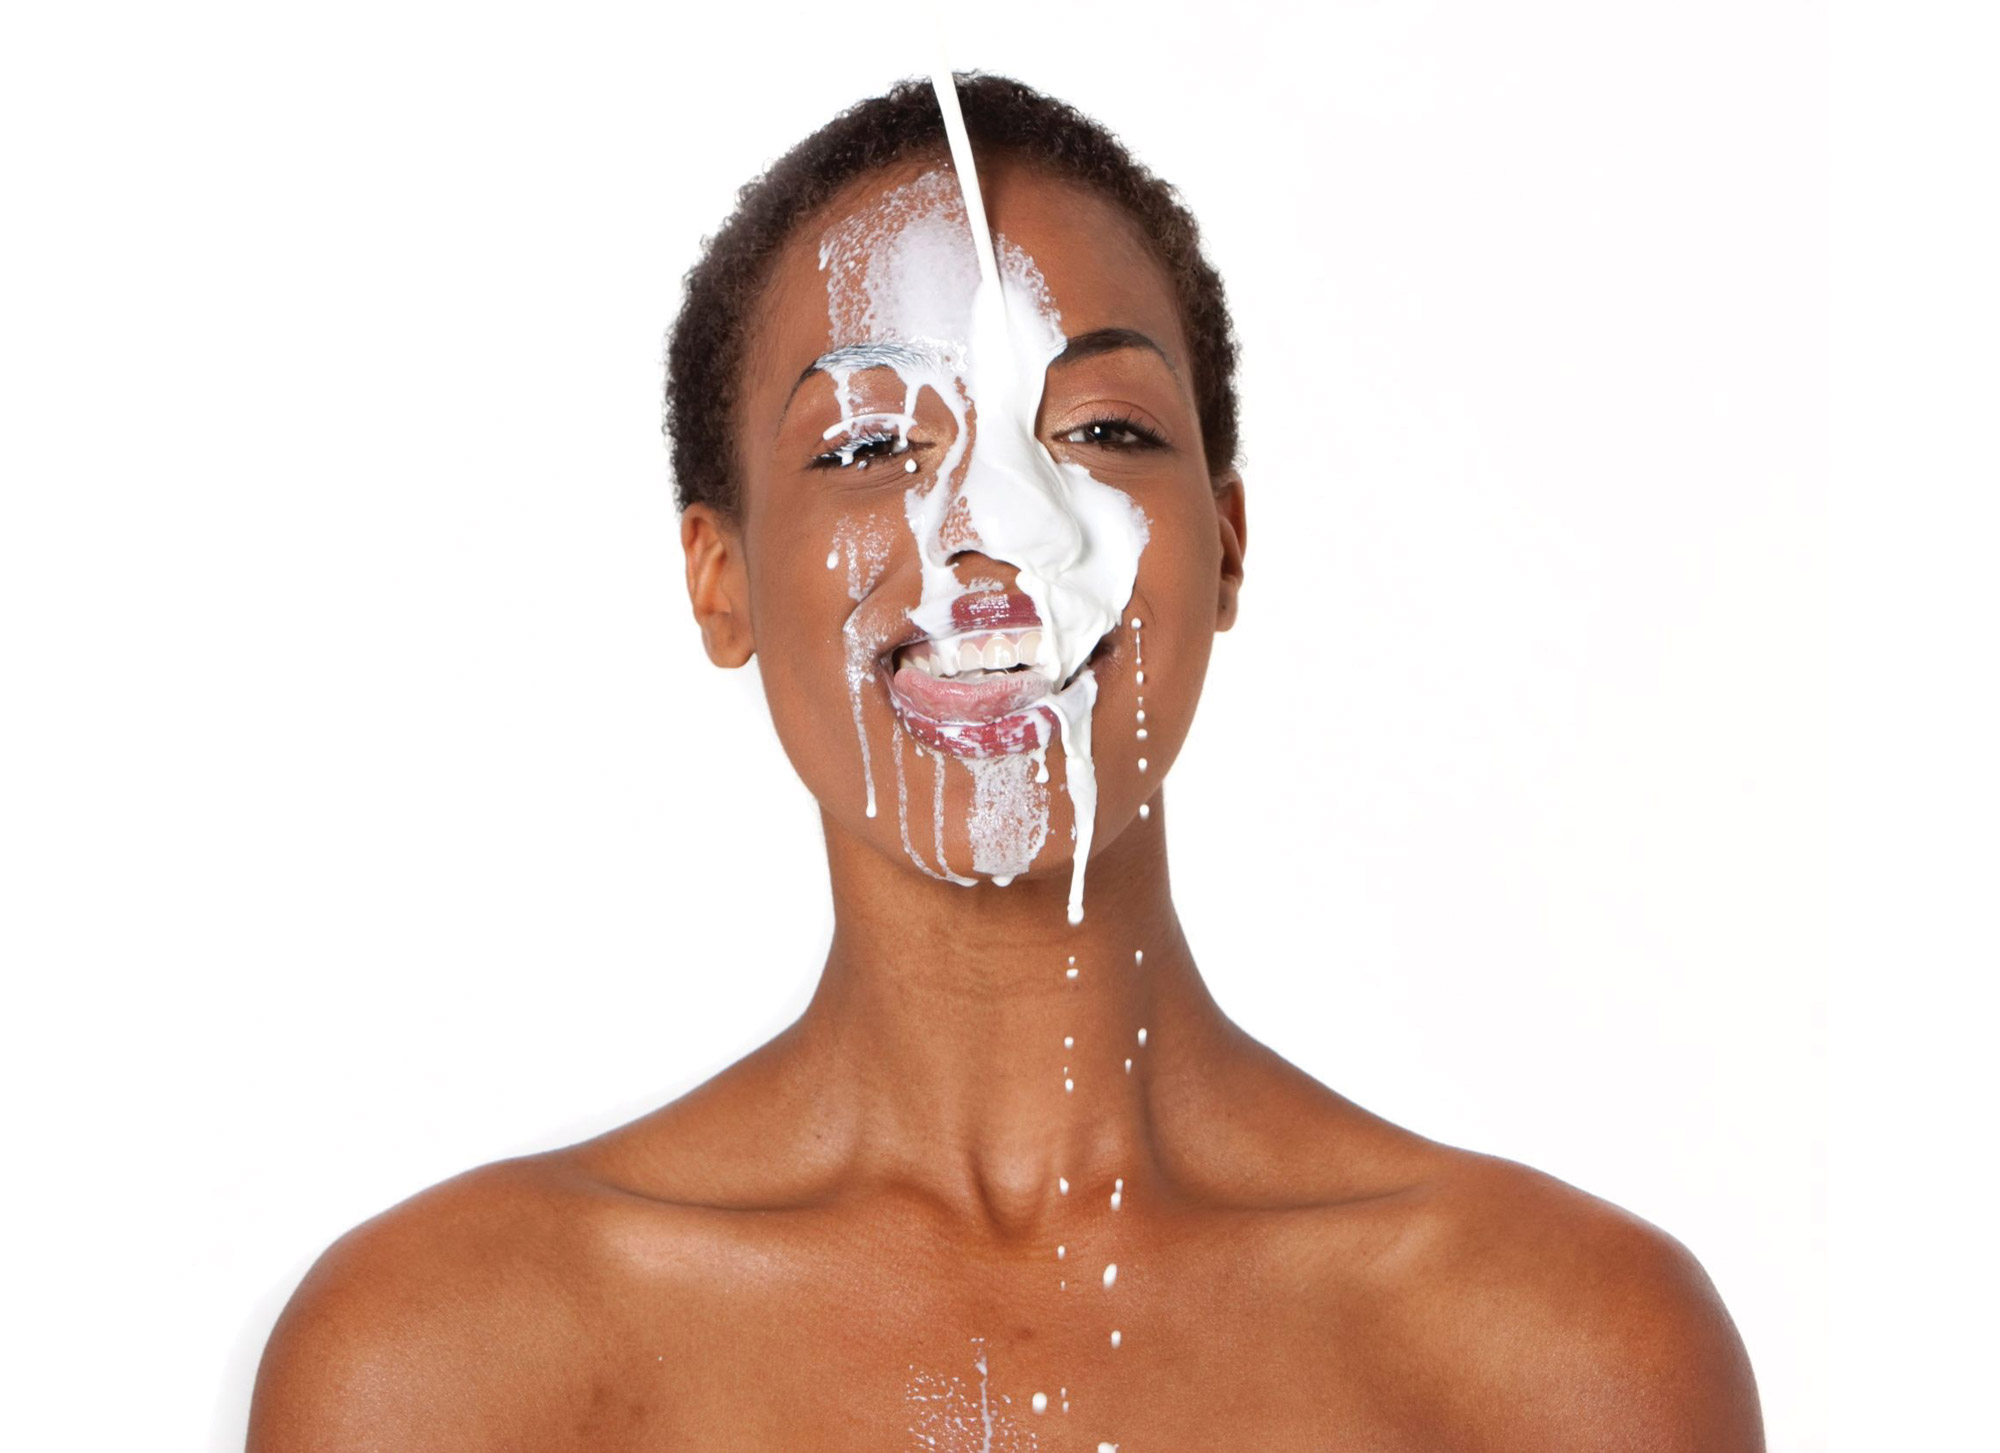 A stock image of a woman with a stream of milk hitting her face.